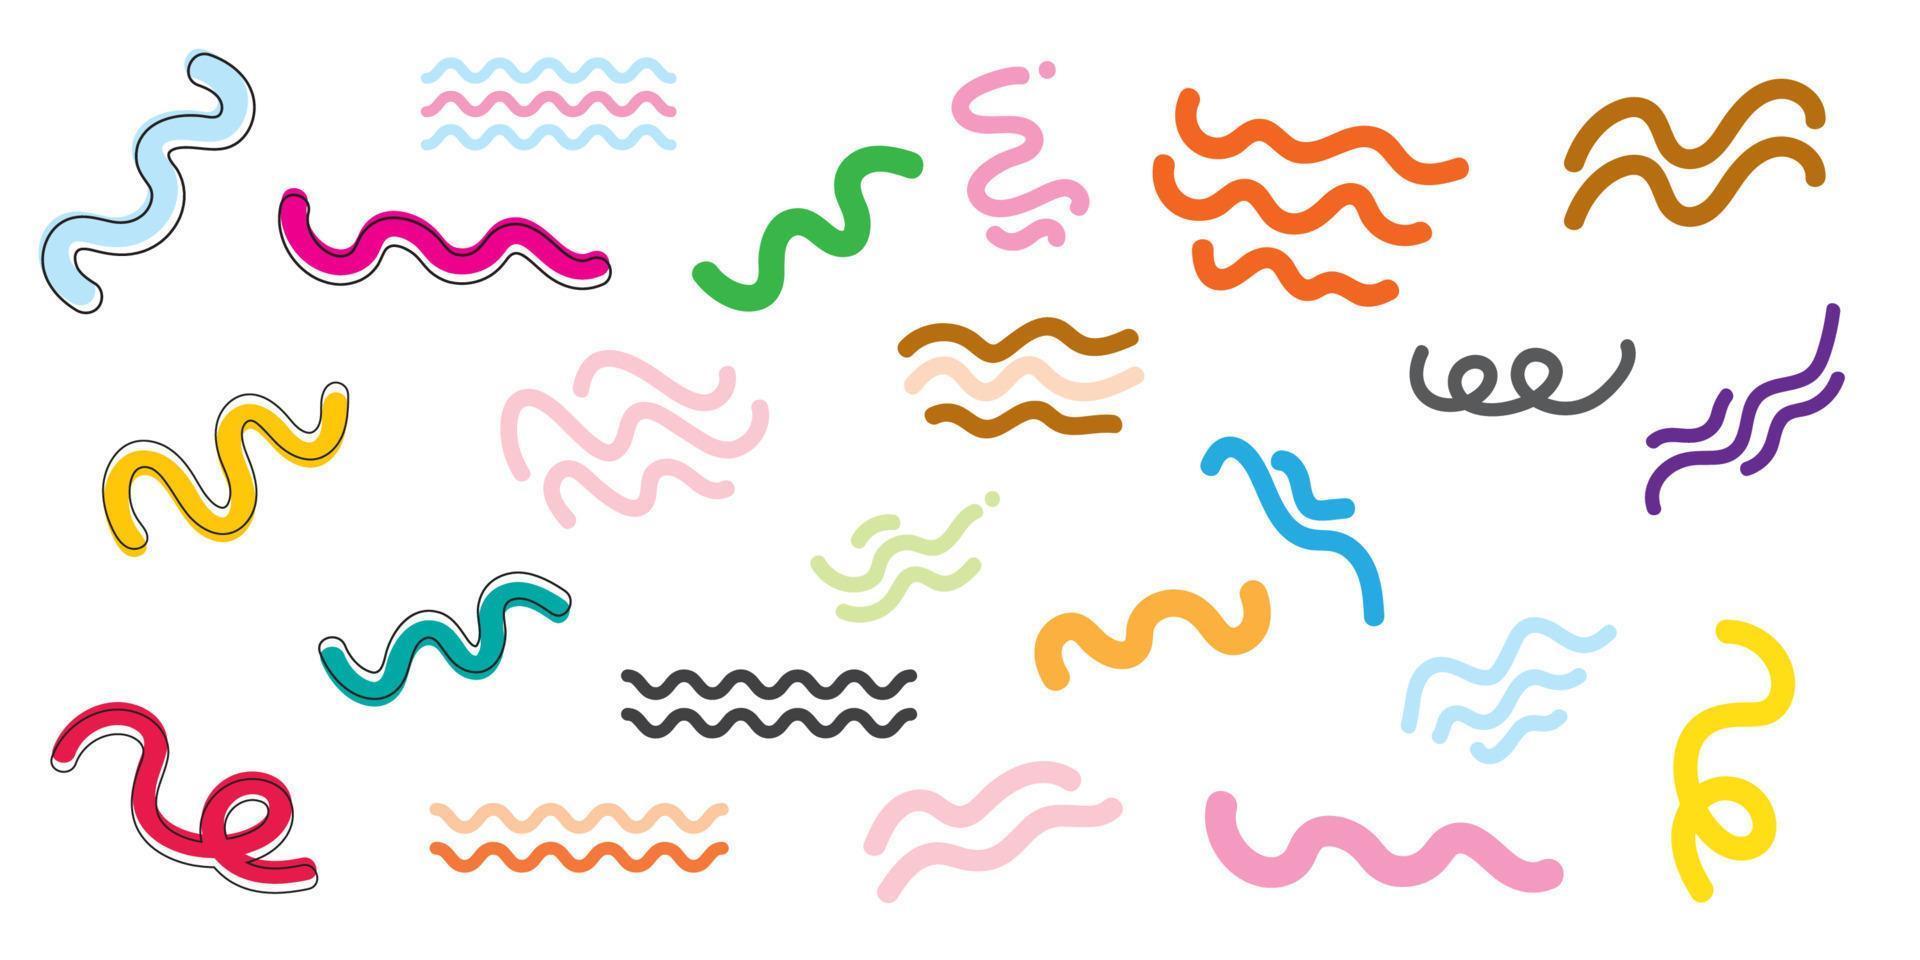 squiggly line hand painted modern style vector